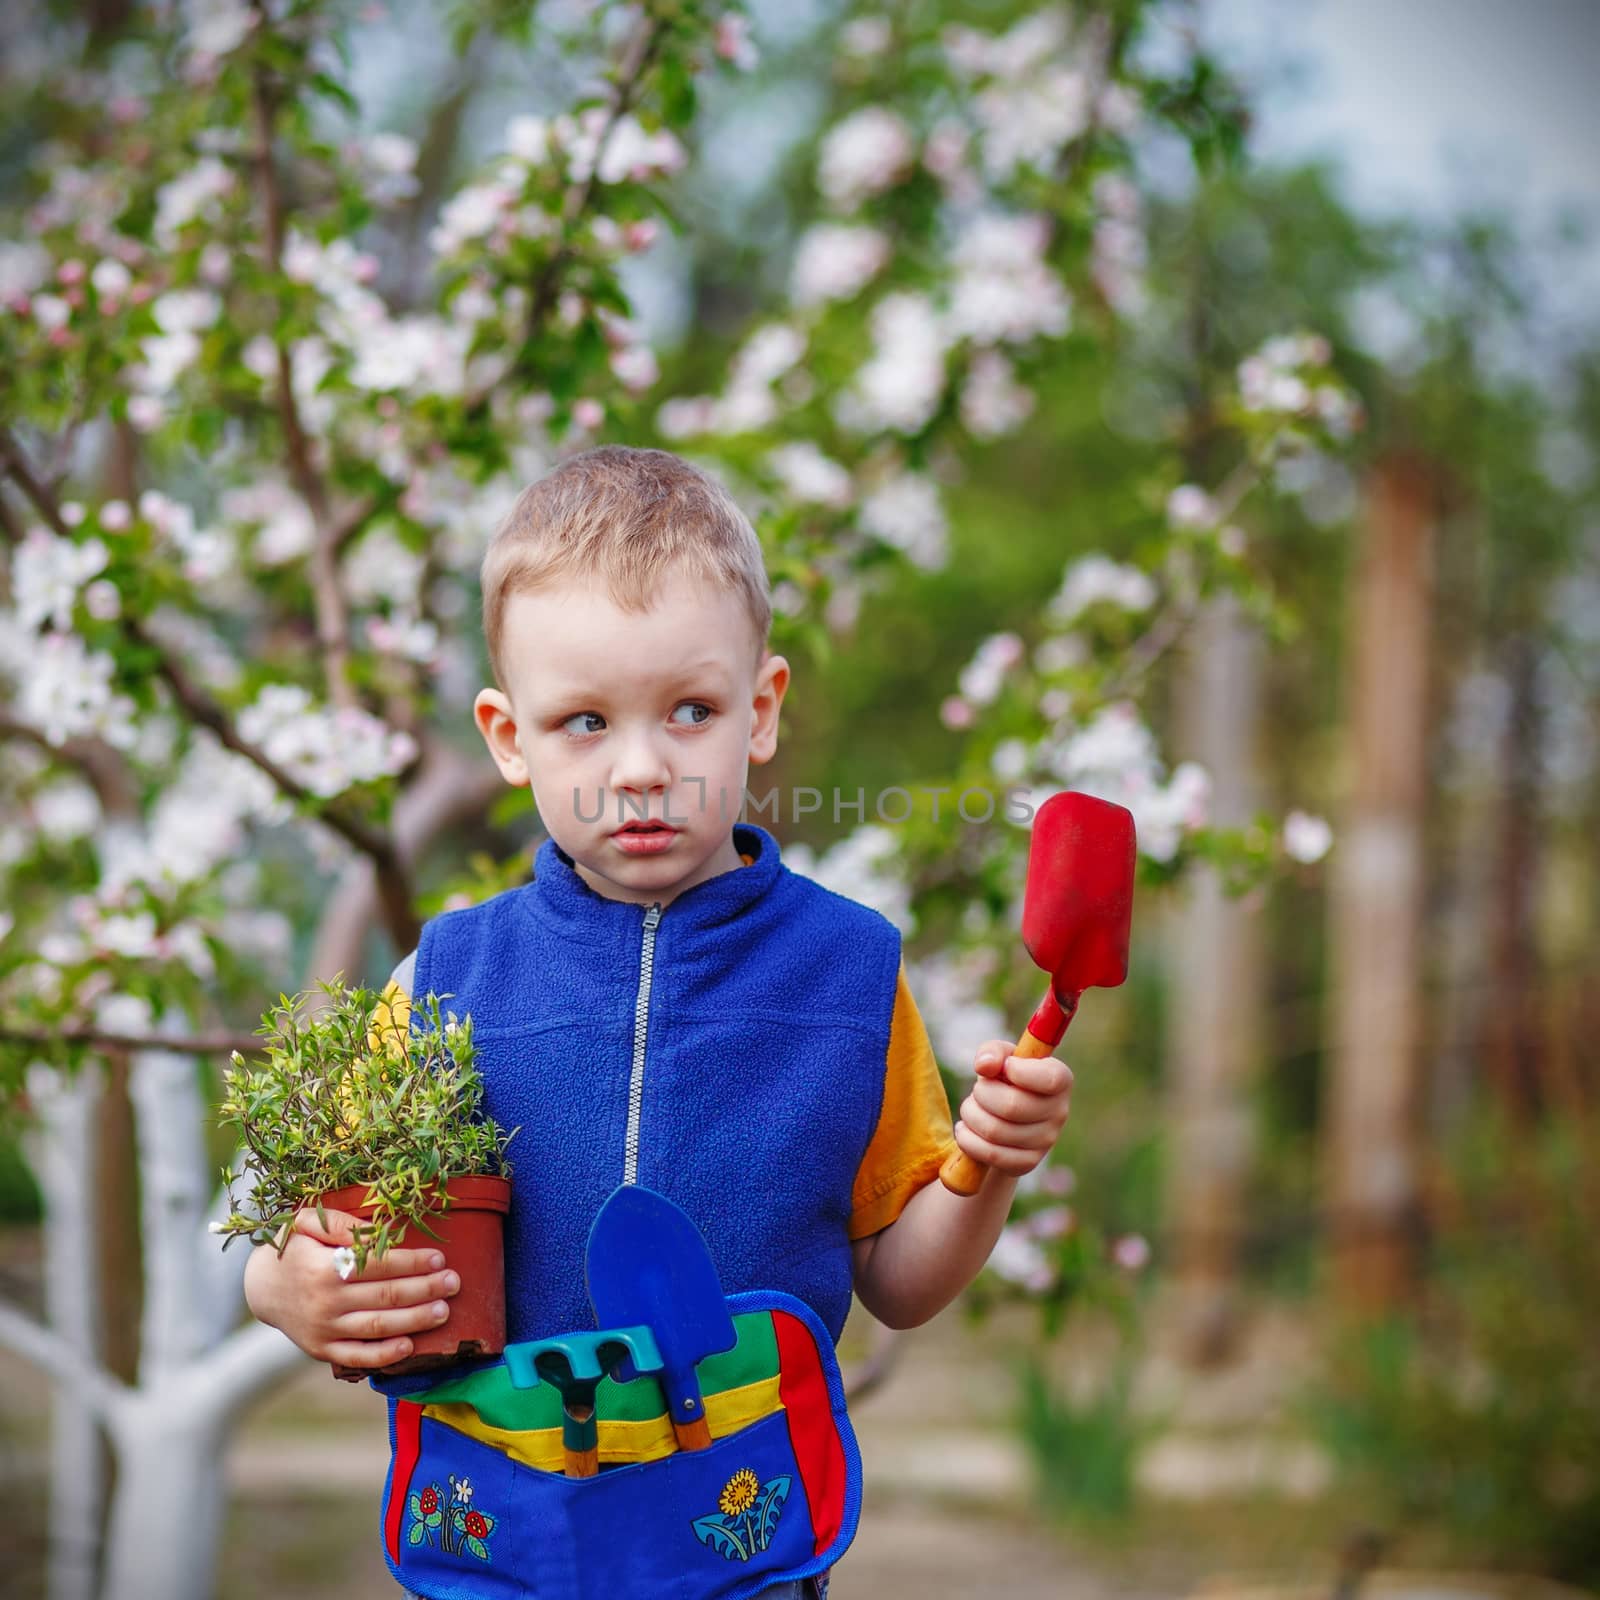 Handsome little blond boy planting and gardening flowers in garden or farm in spring day